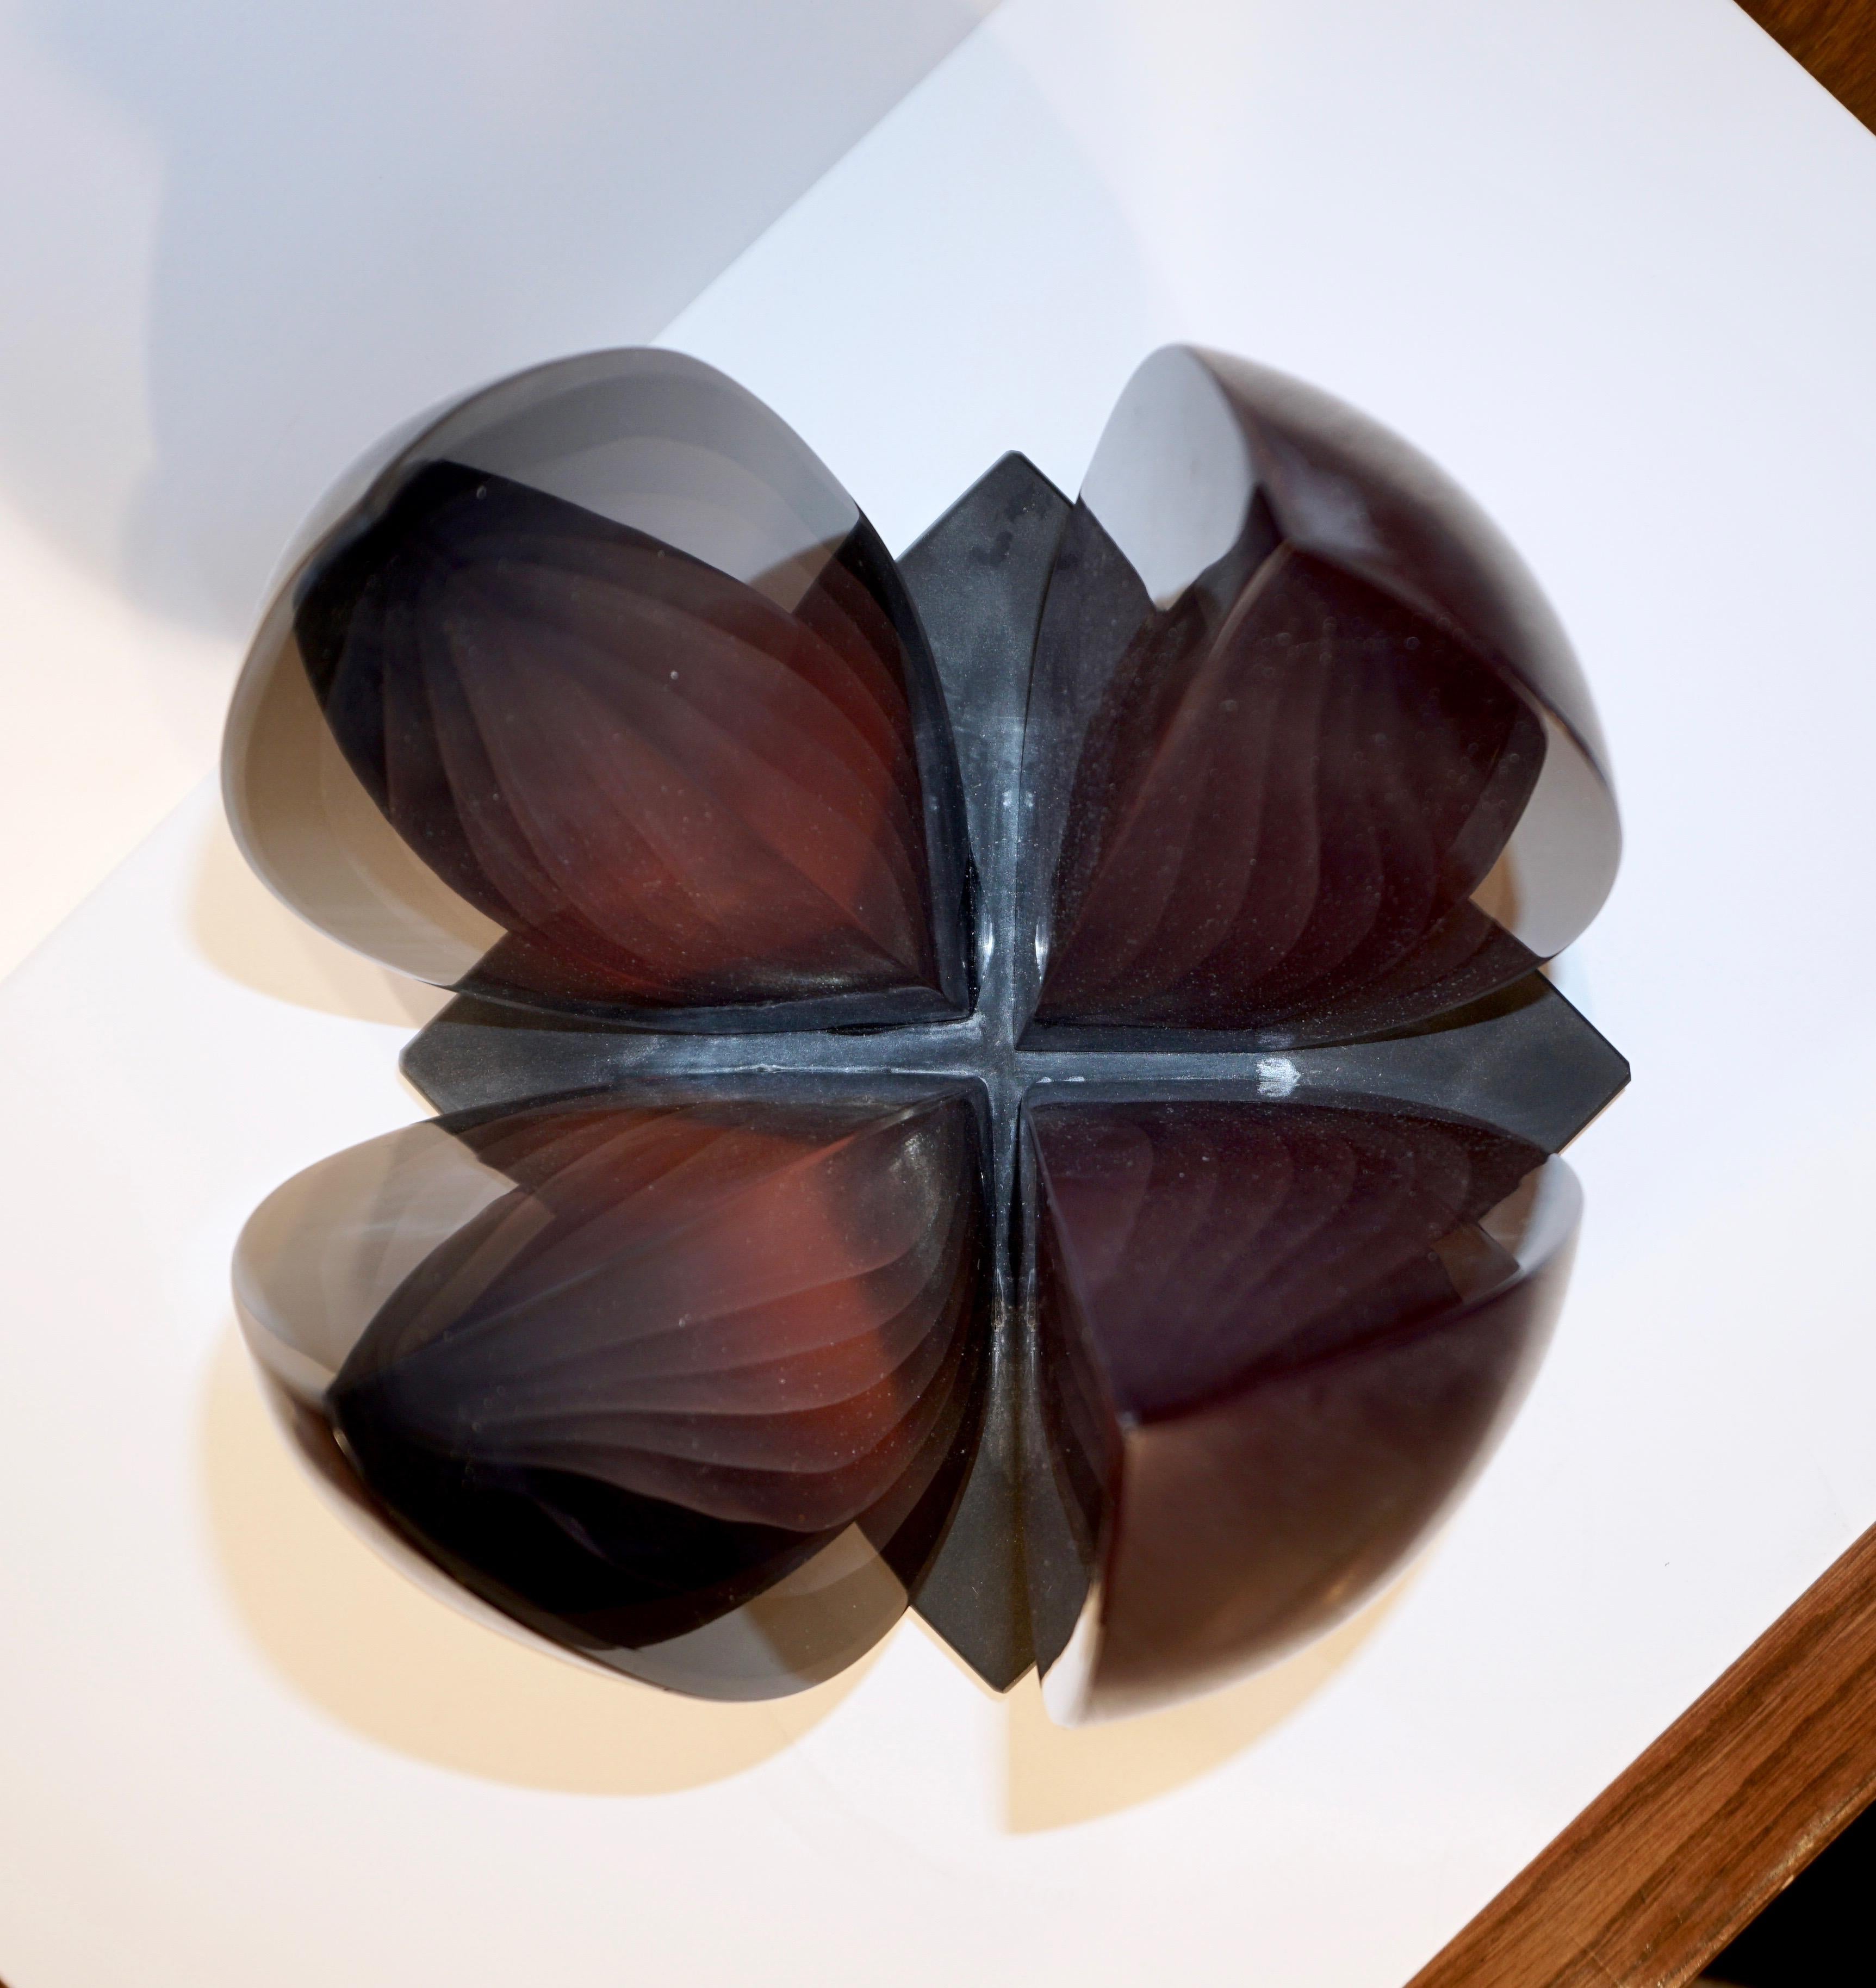 Minimalist abstract sculpture in a dark plum color composed of 4 cloves, realized with the Sbruffi technique in 7 layers of various color intensities that each catches the light differently, overlaid in a darker glass with matt finish, raised on a